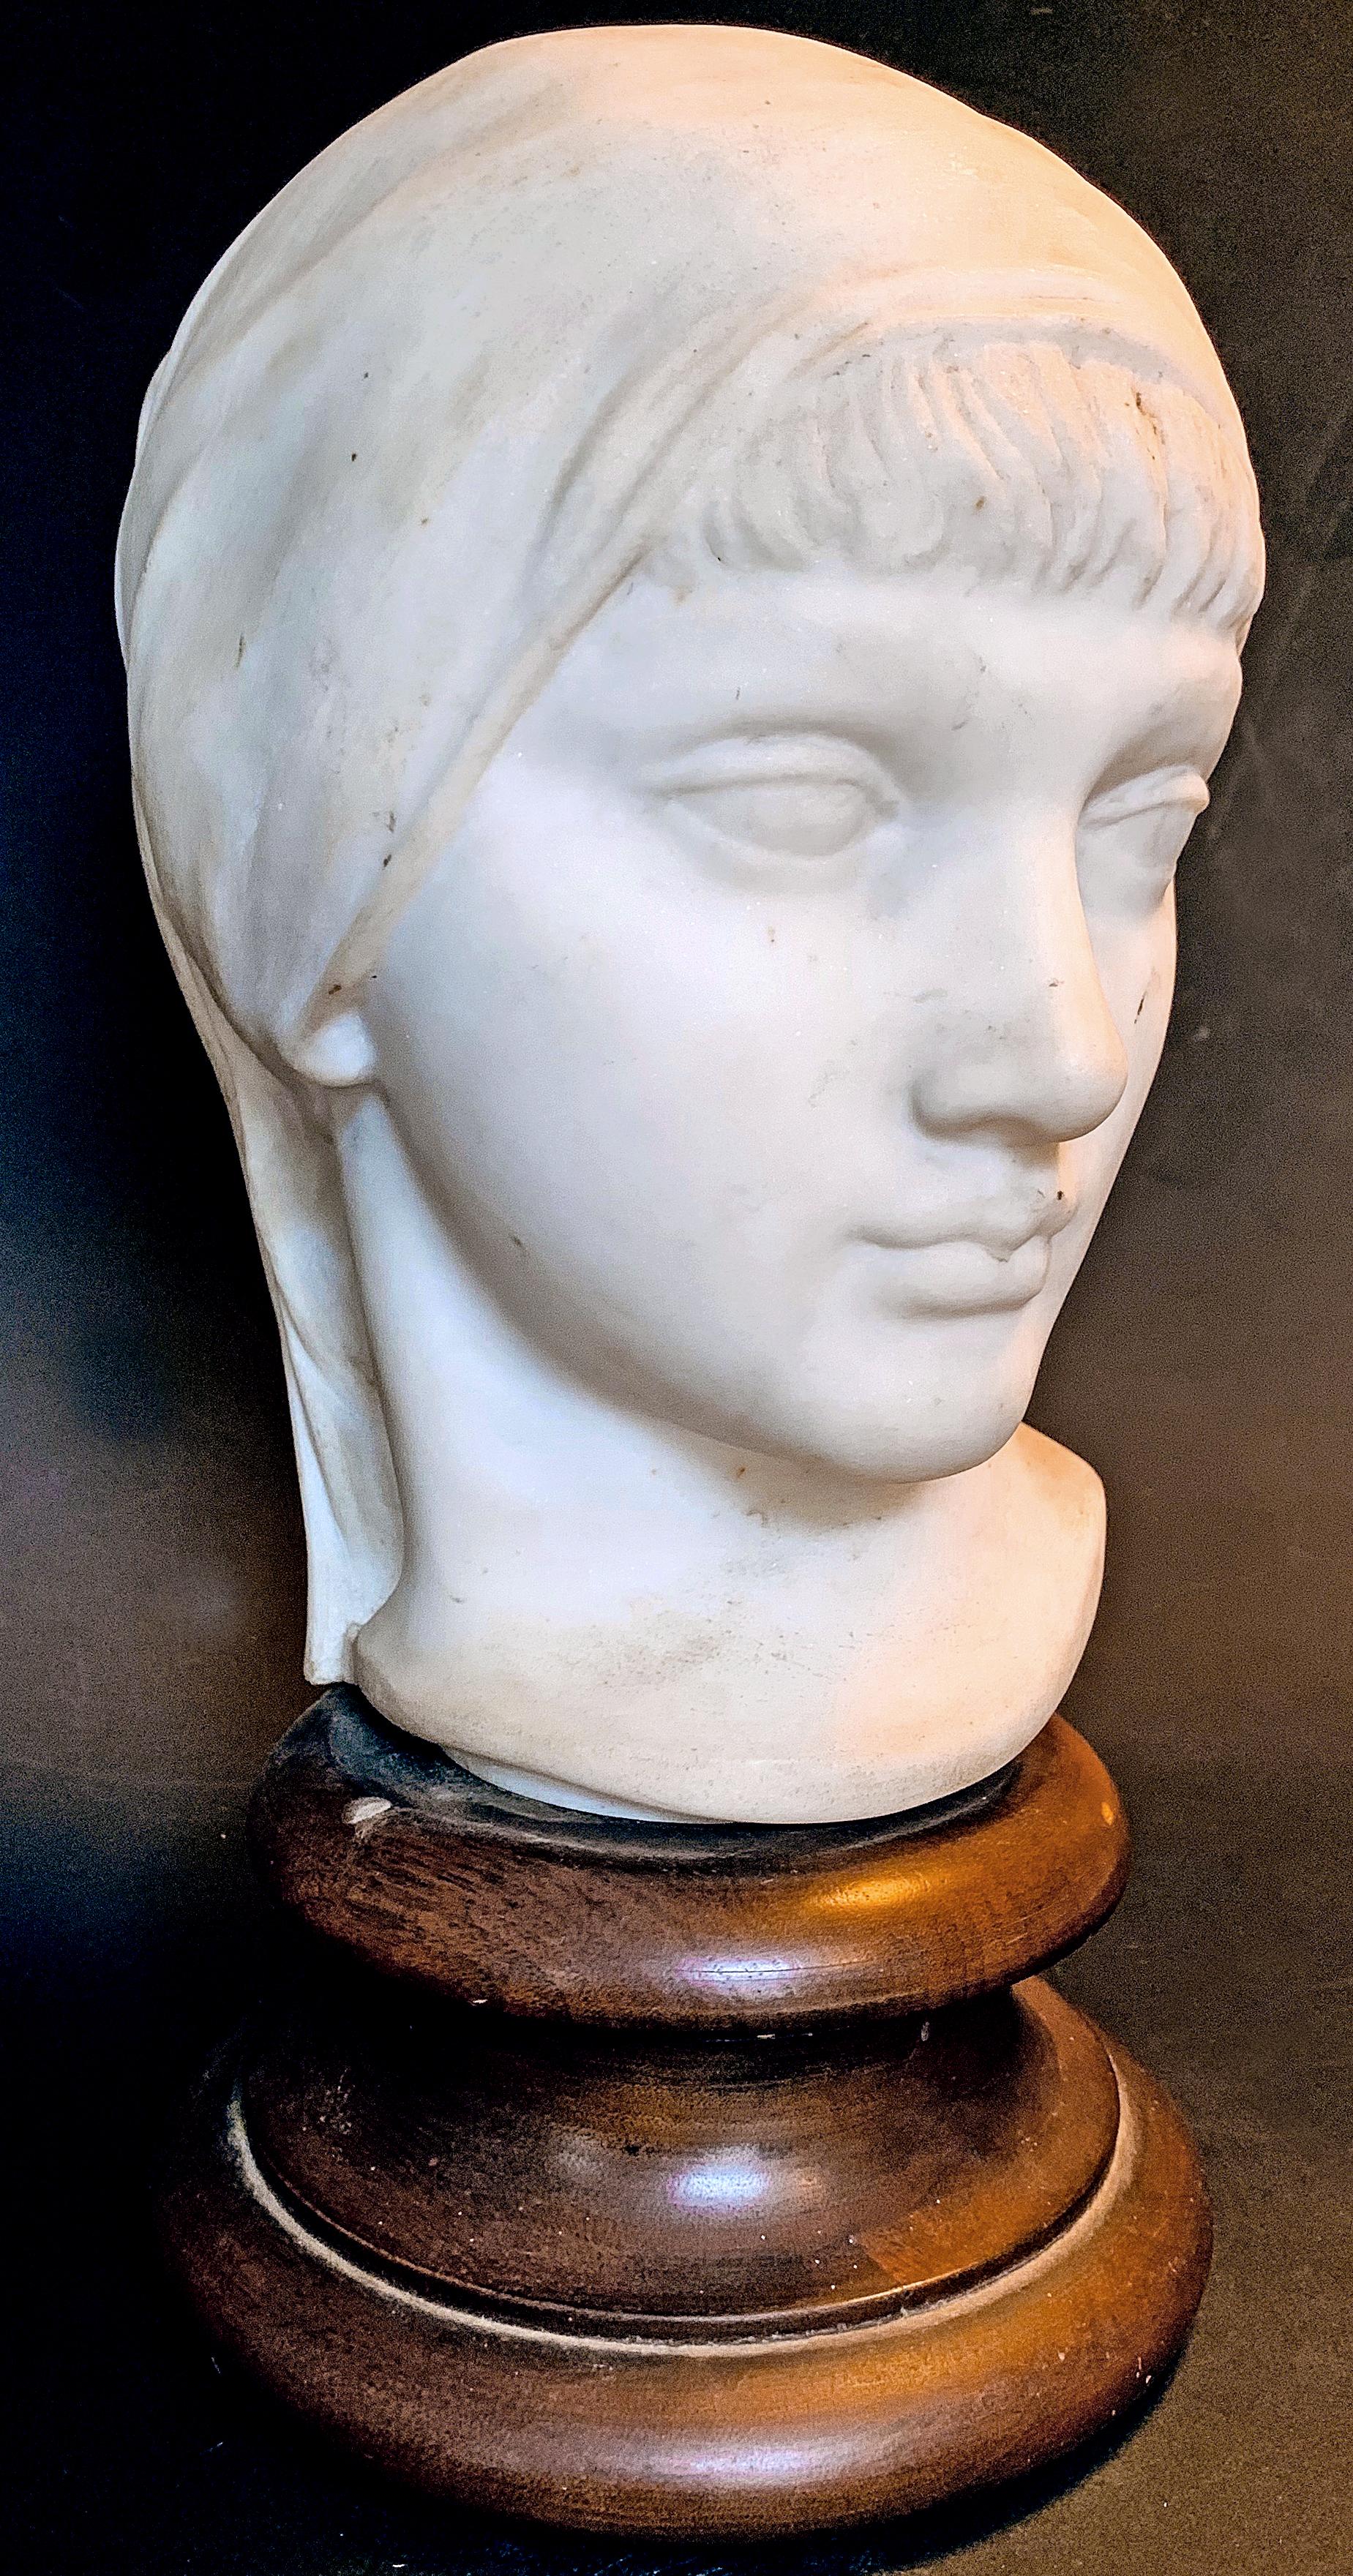 An extraordinary piece of American sculpture, this depiction of a young woman, dated 1930, was sculpted in white marble by John Gregory -- who executed 9 large bas relief panels for the Folger Shakespeare Library in Washington, D.C. -- for Paul